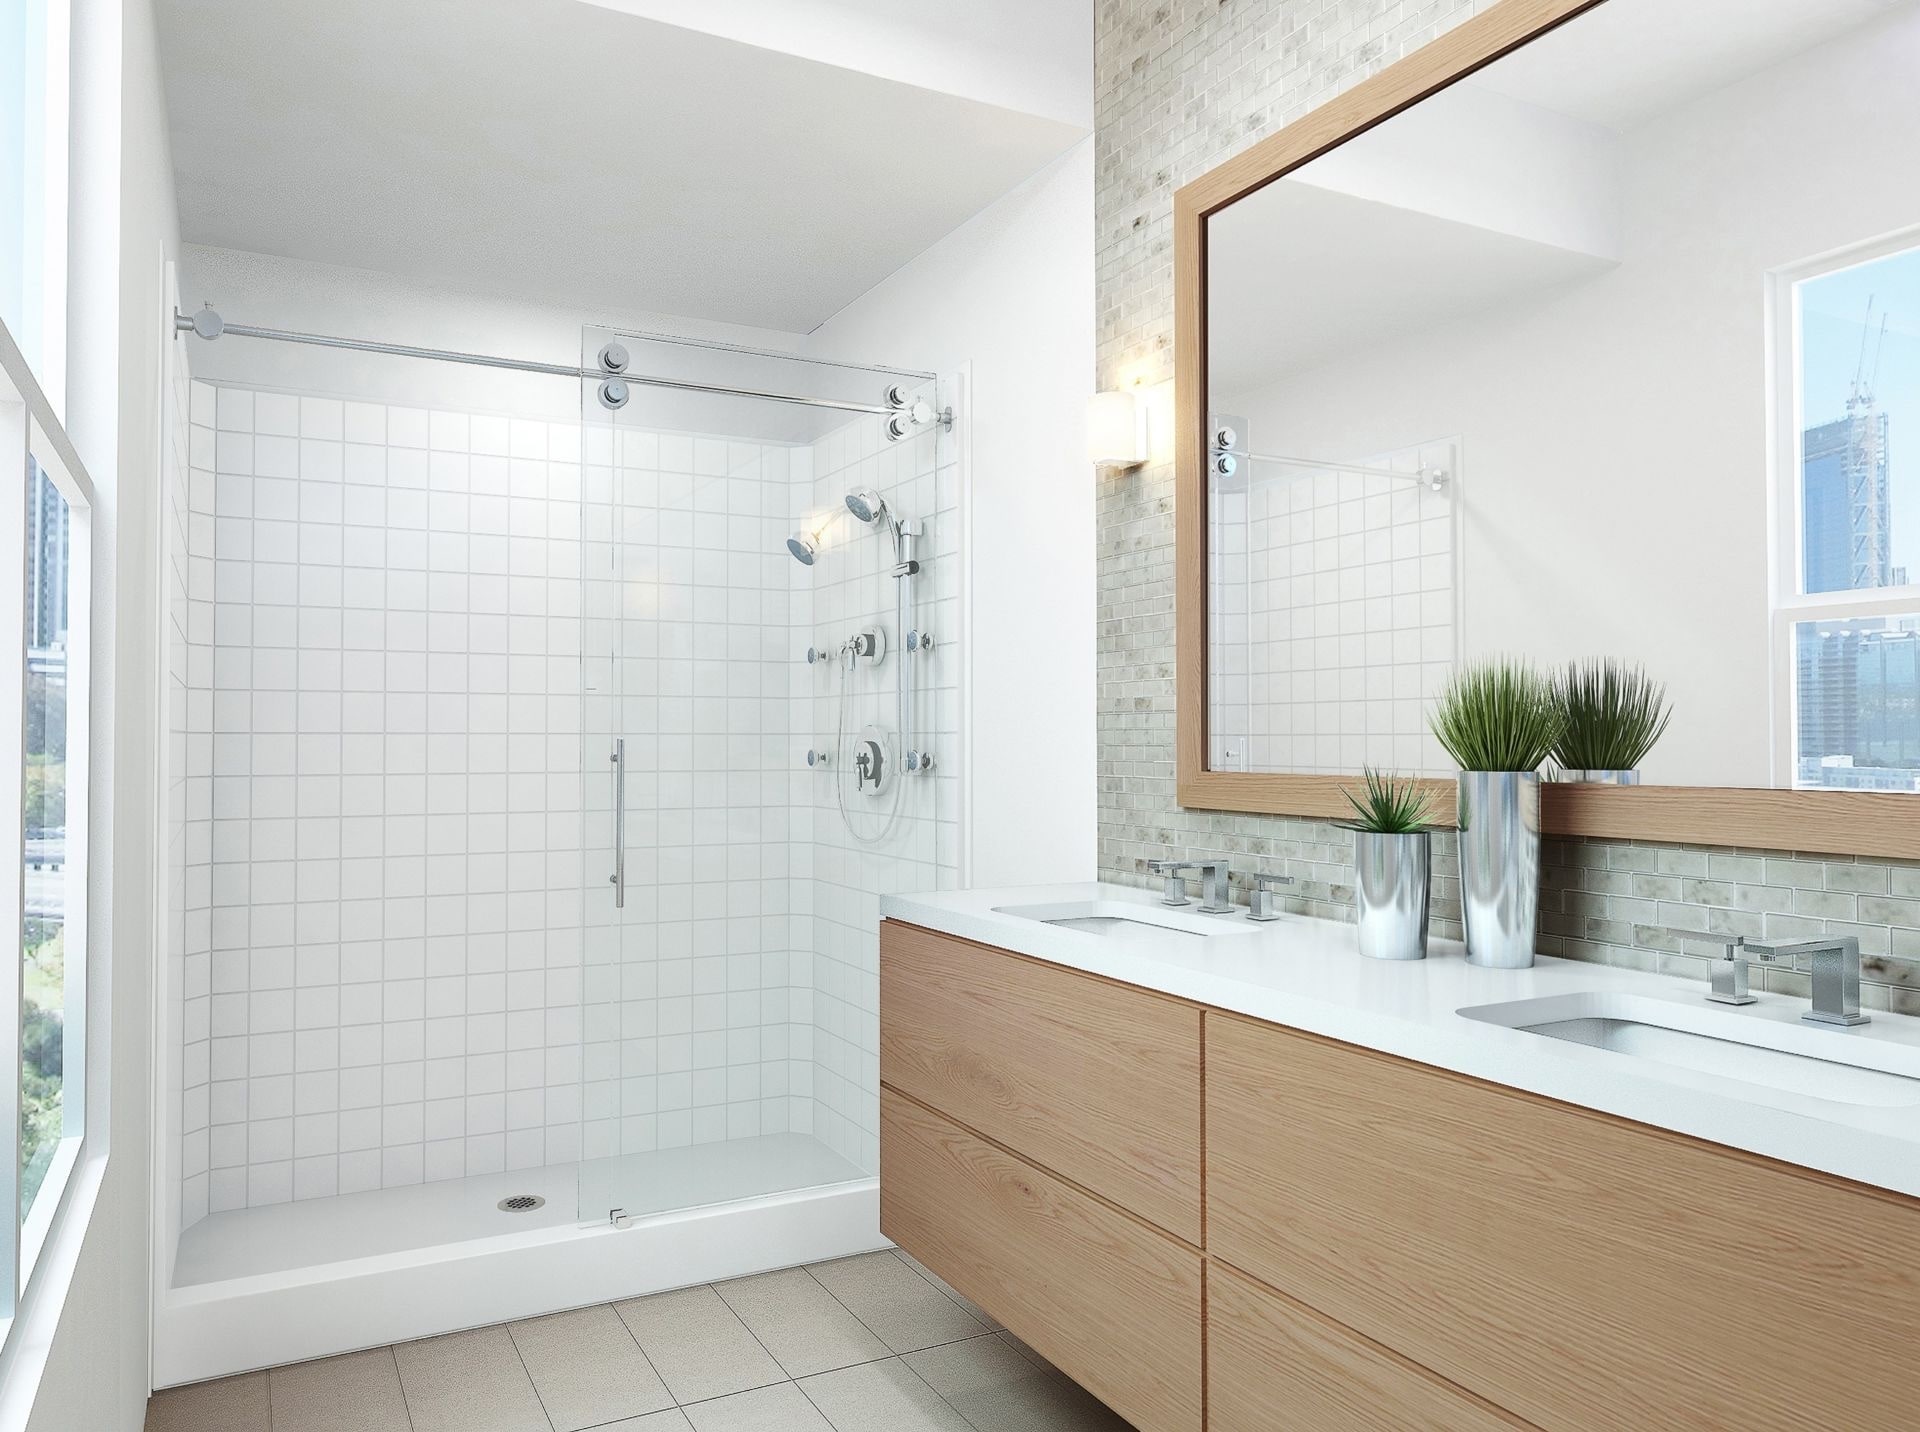 Spare, Scandinavian bathroom idea with white tile and glass shower doors